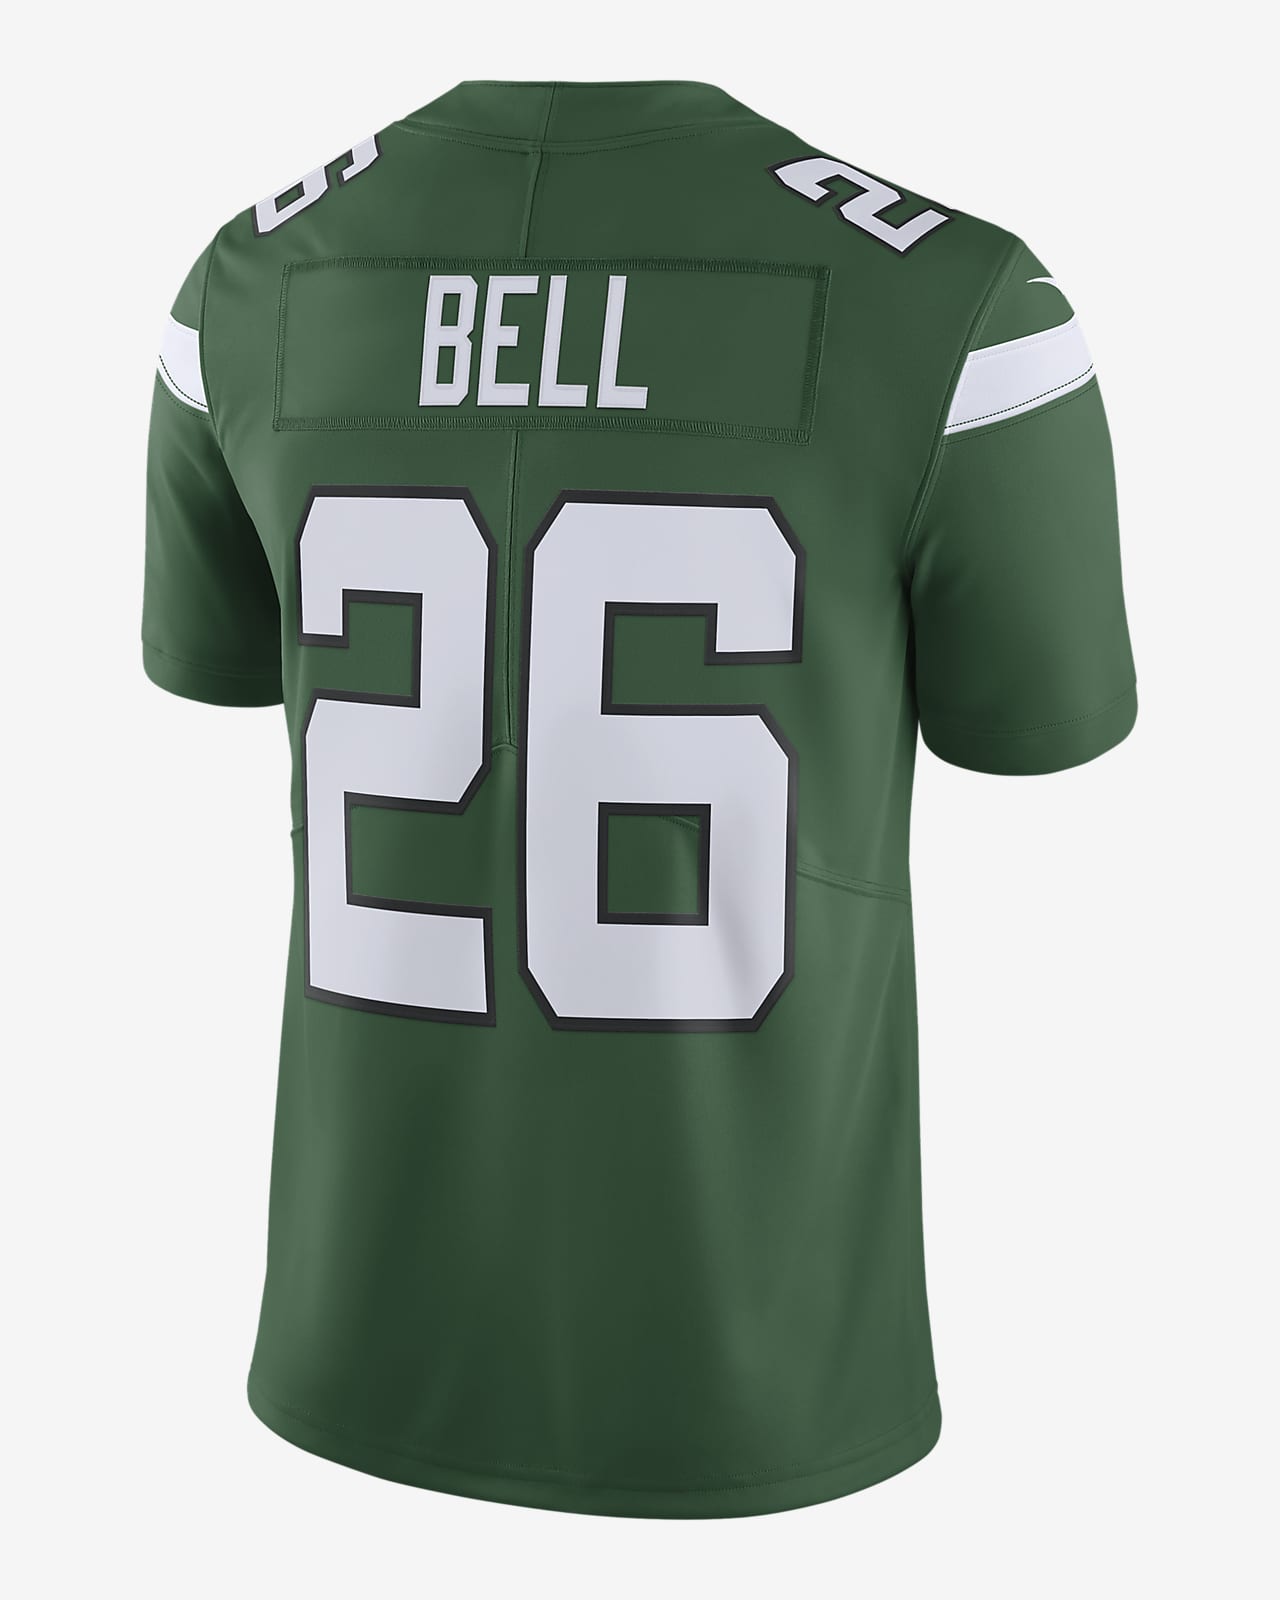 jets bell jersey